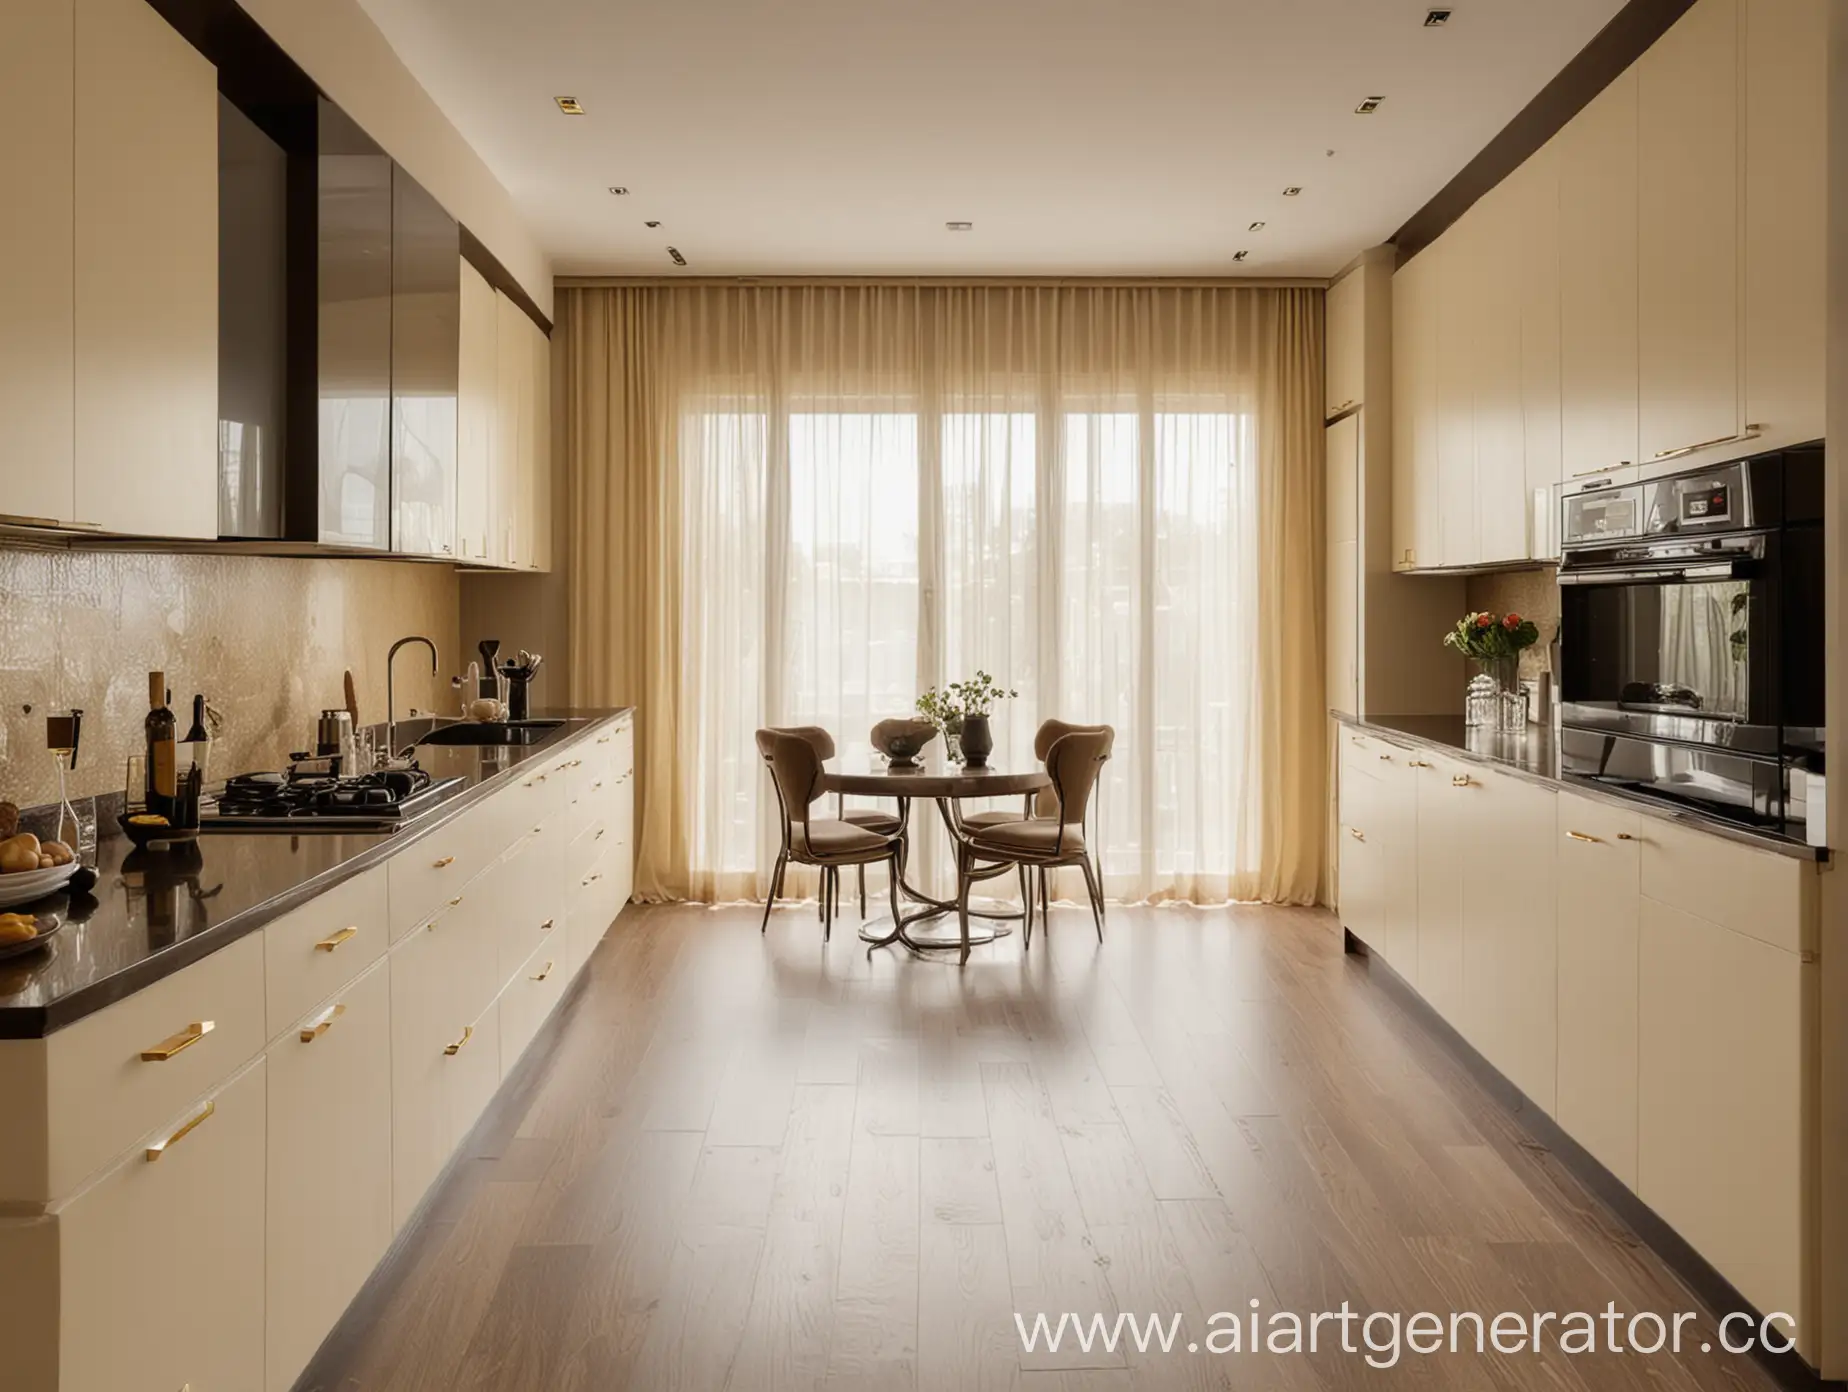 Warm-and-Inviting-Kitchen-with-Ivory-Walls-and-Golden-Curtains